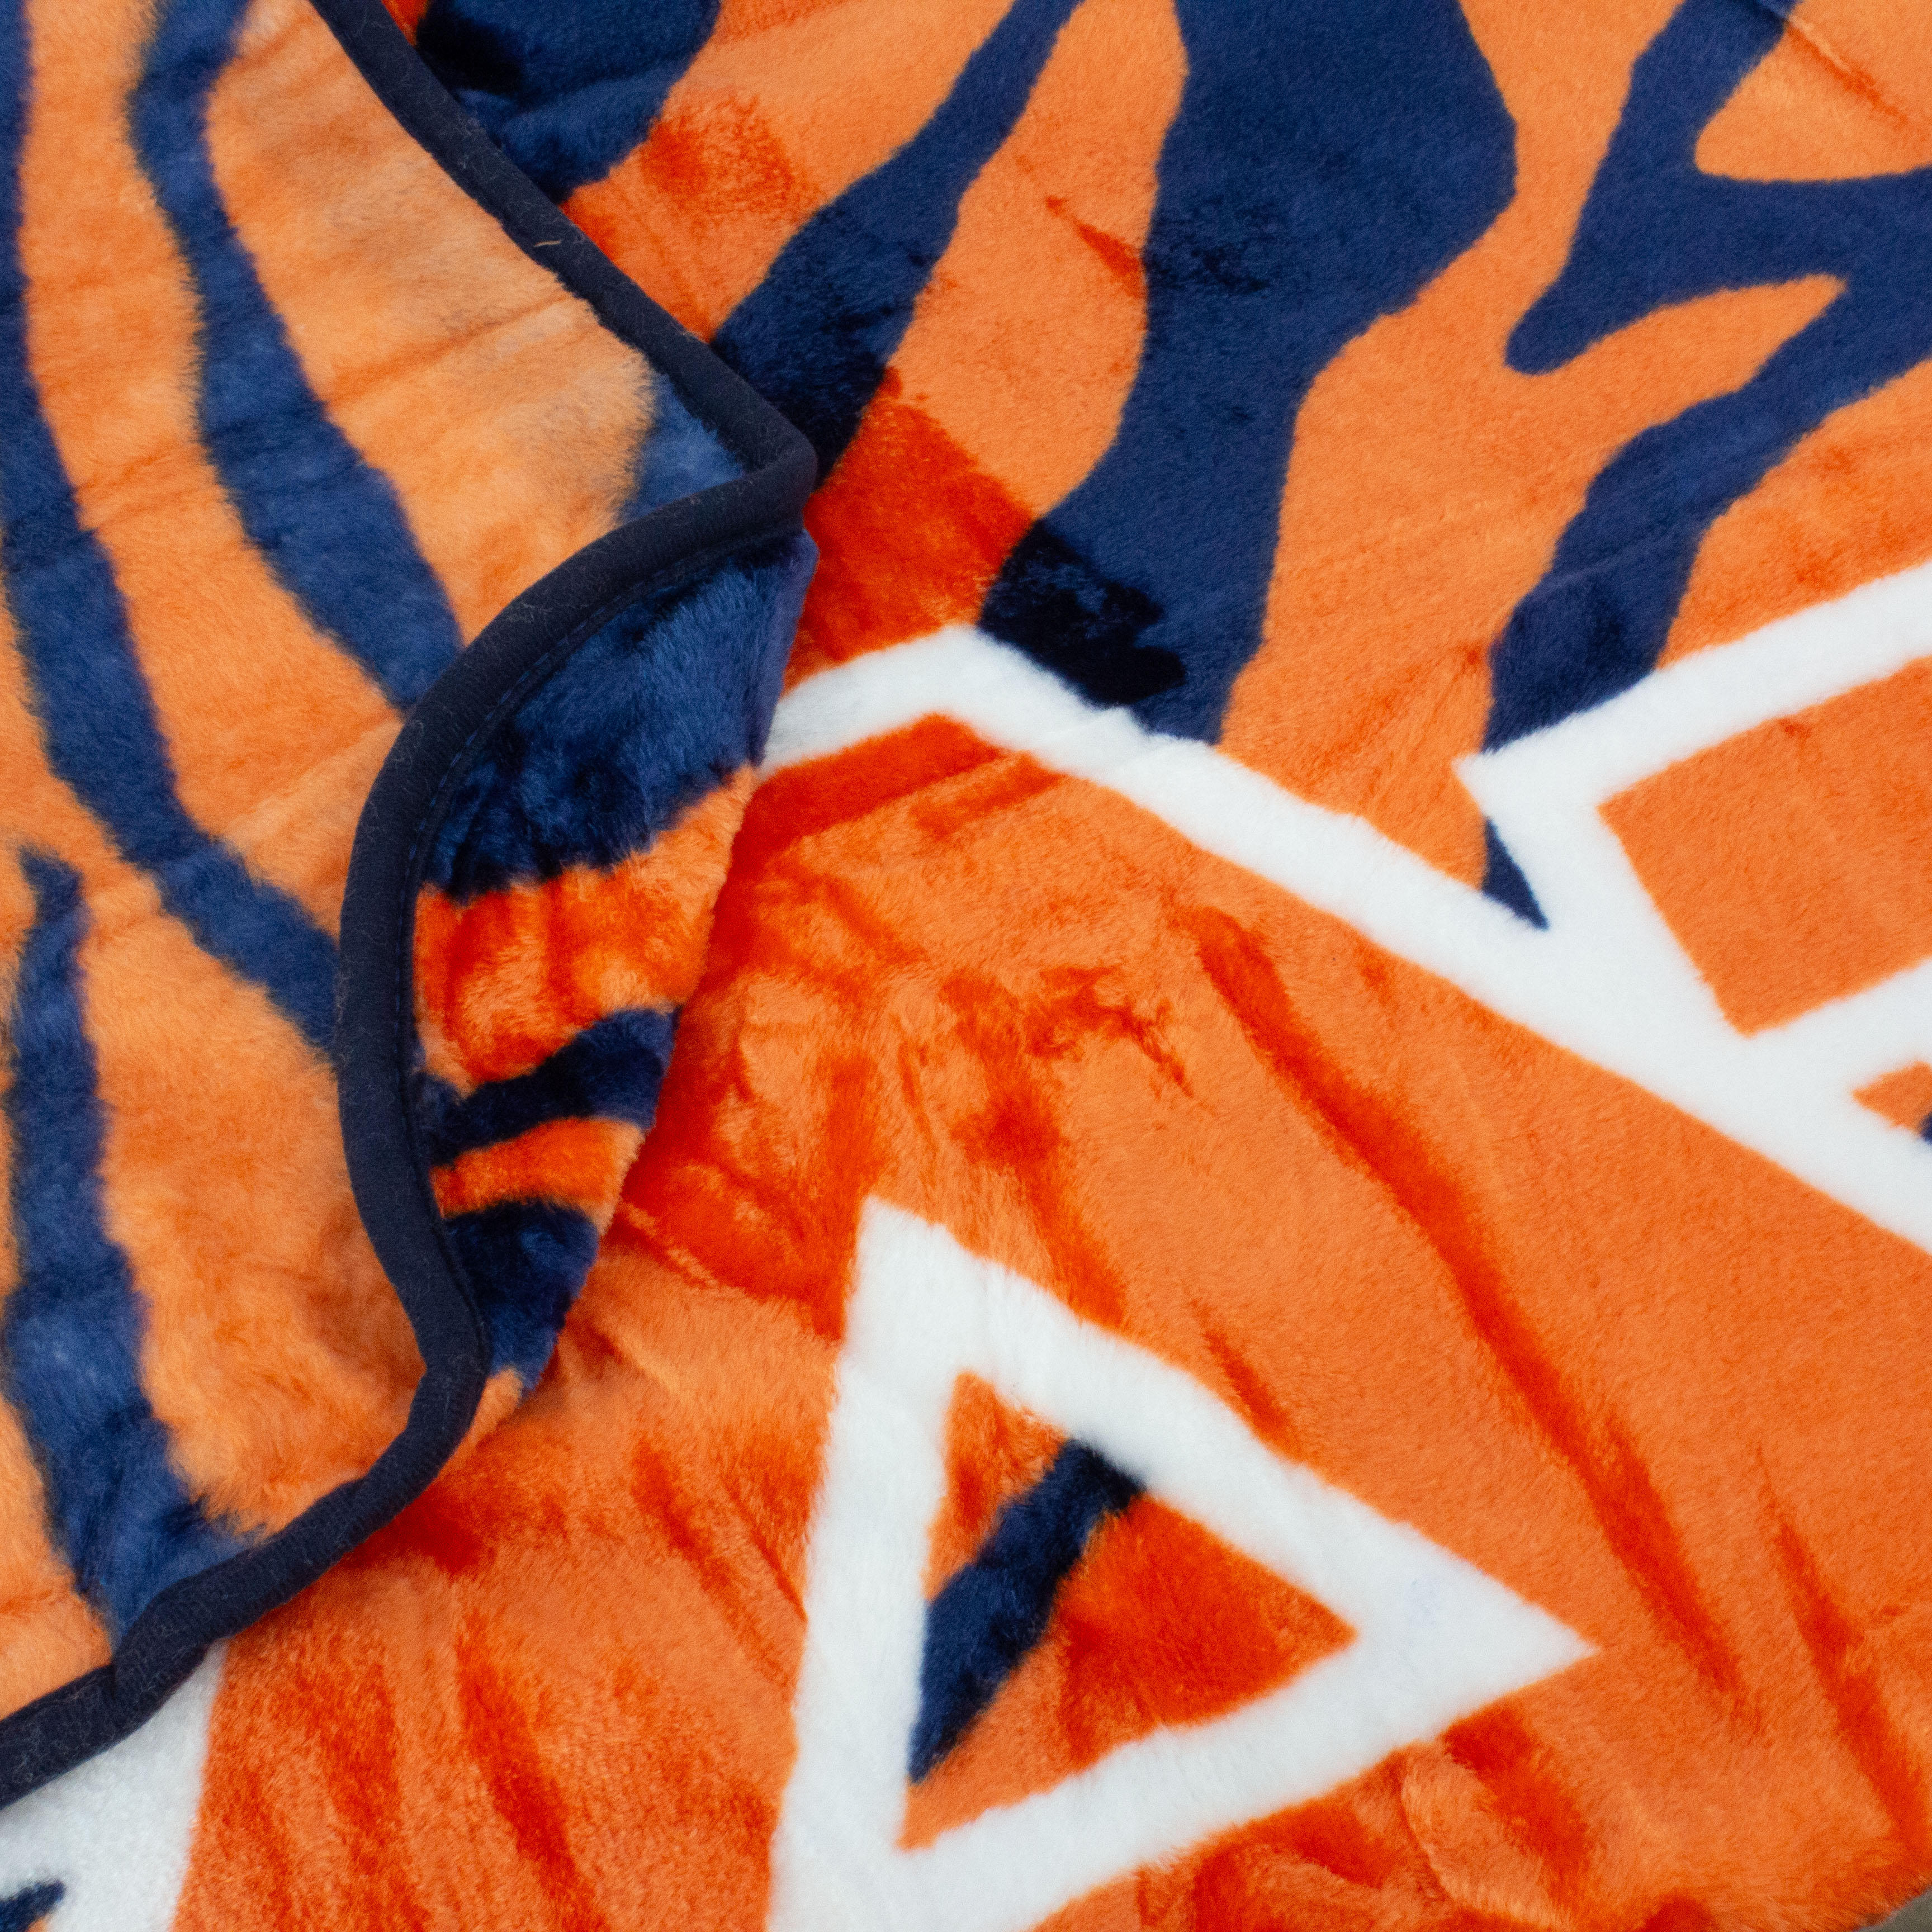 College Covers Everything Comfy Auburn Tigers Soft Raschel Throw Blanket, 60" x 50" - image 5 of 8